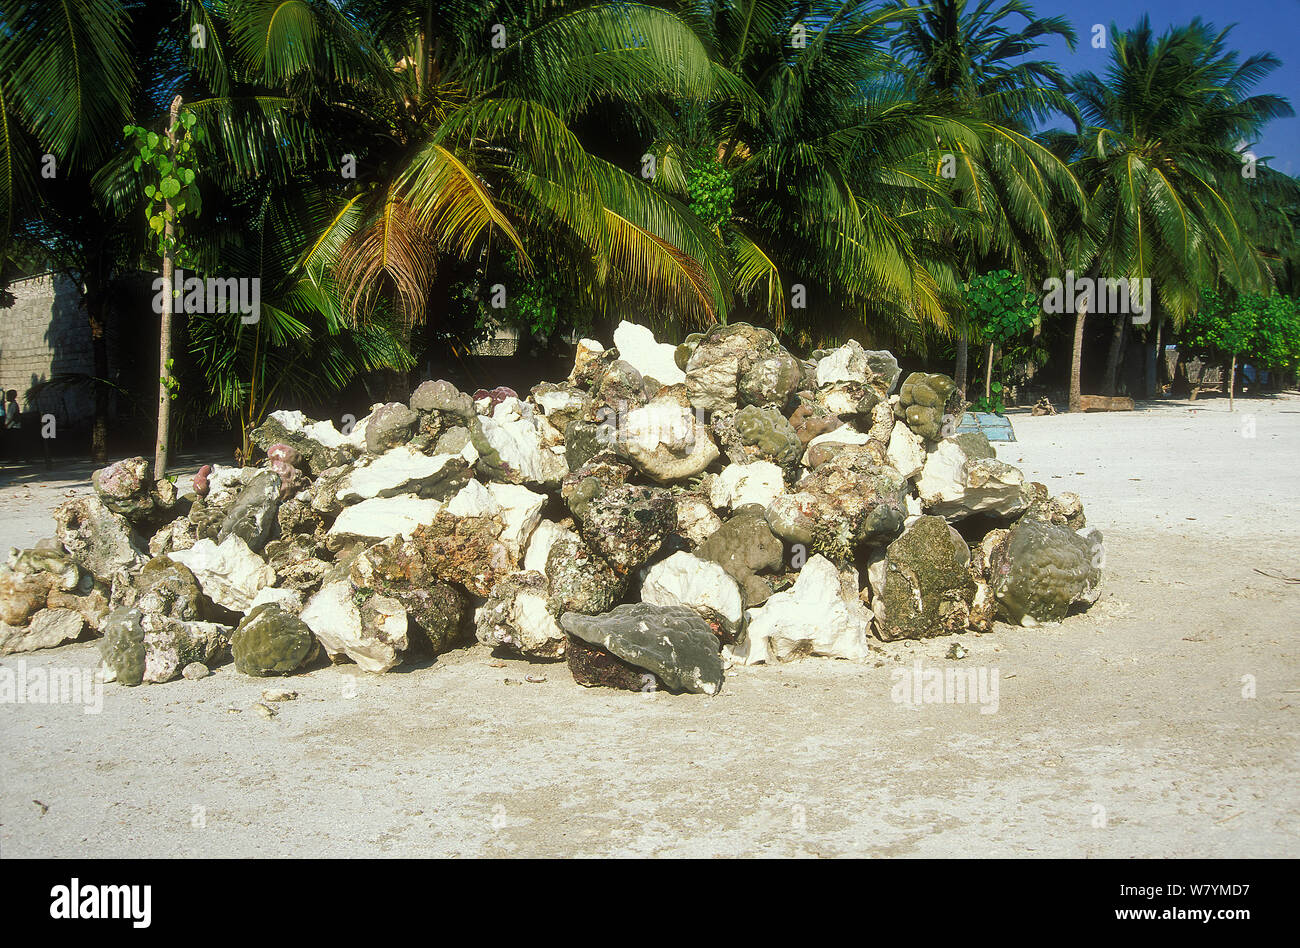 Coral, harvested from barrier reef for construction, piled on beach, Baa Atoll, Maldives, Indian Ocean.   1998 Stock Photo